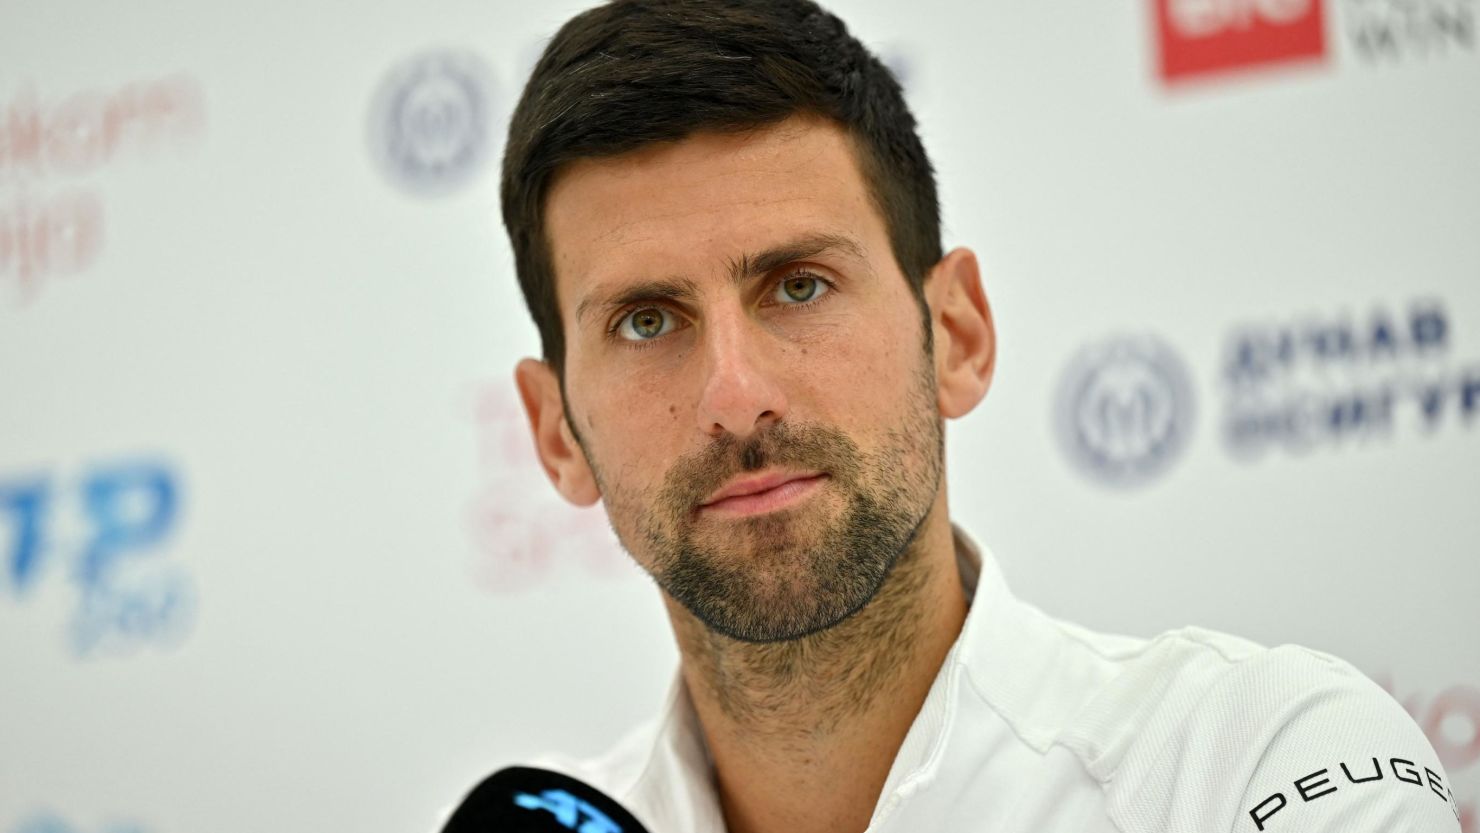 Novak Djokovic attends a press conference during the Serbia Open in Belgrade on April 18, 2022.